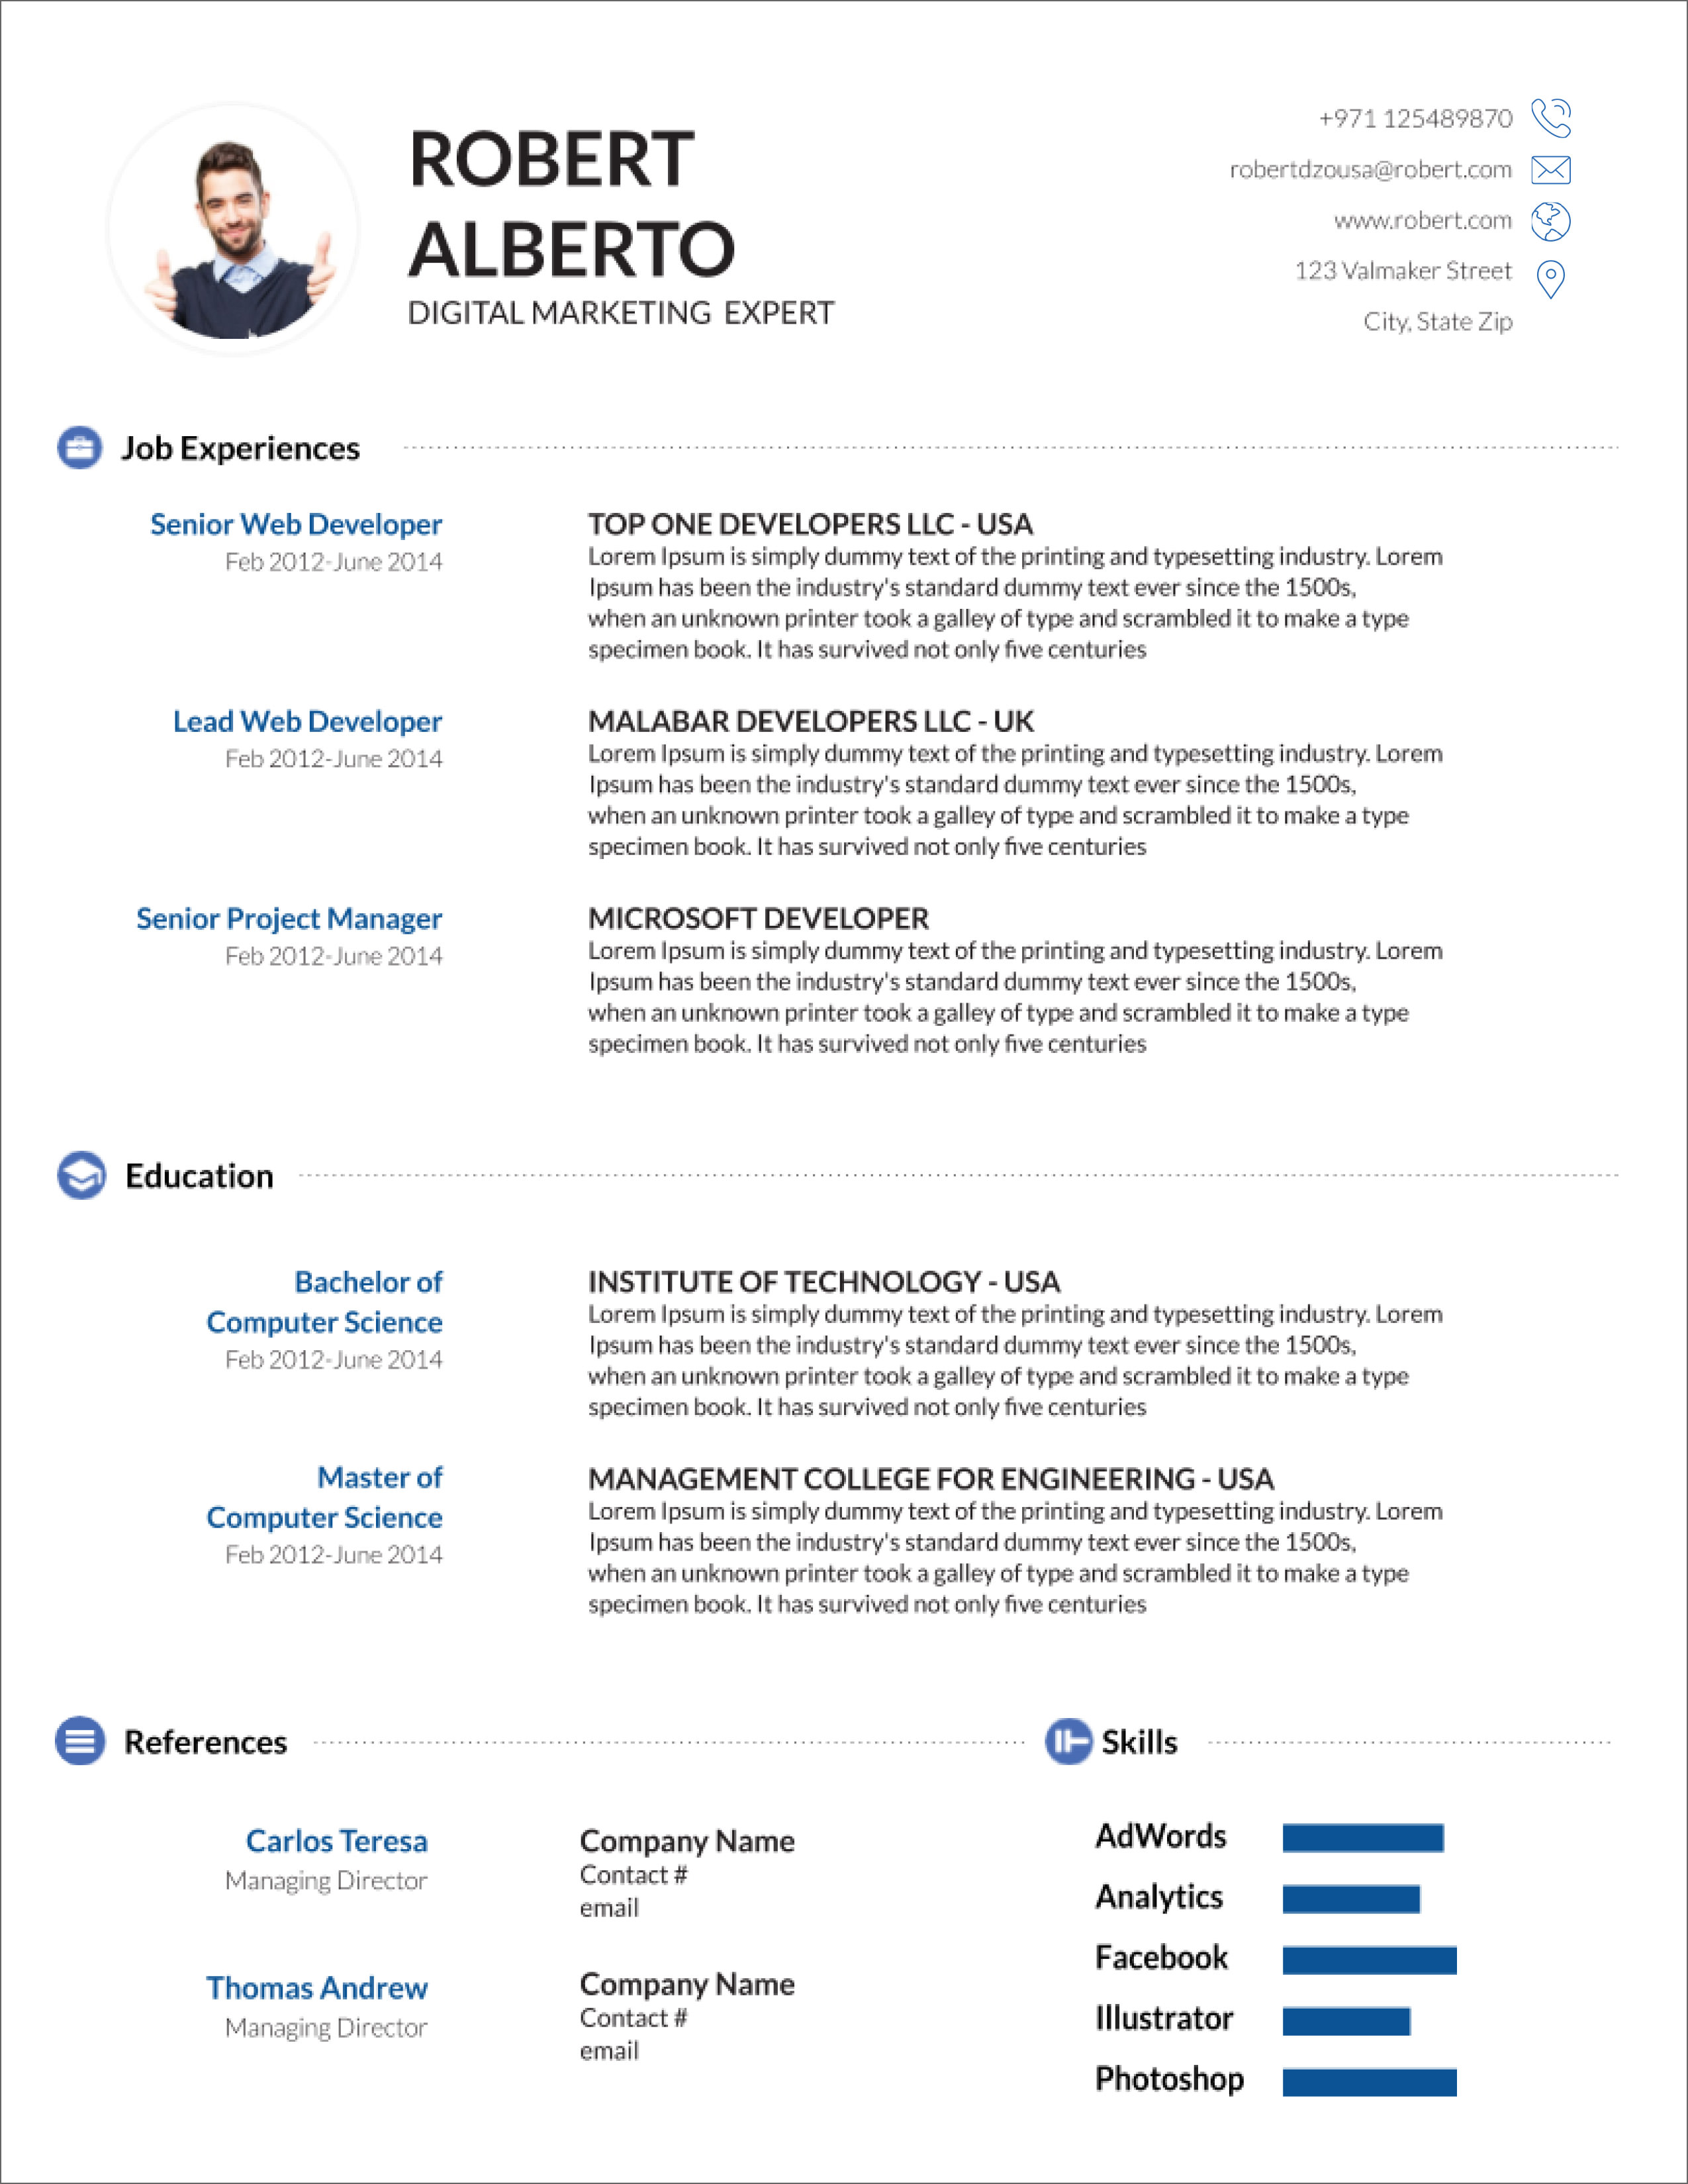 Resume Templates Free Word 2007 Polizreview